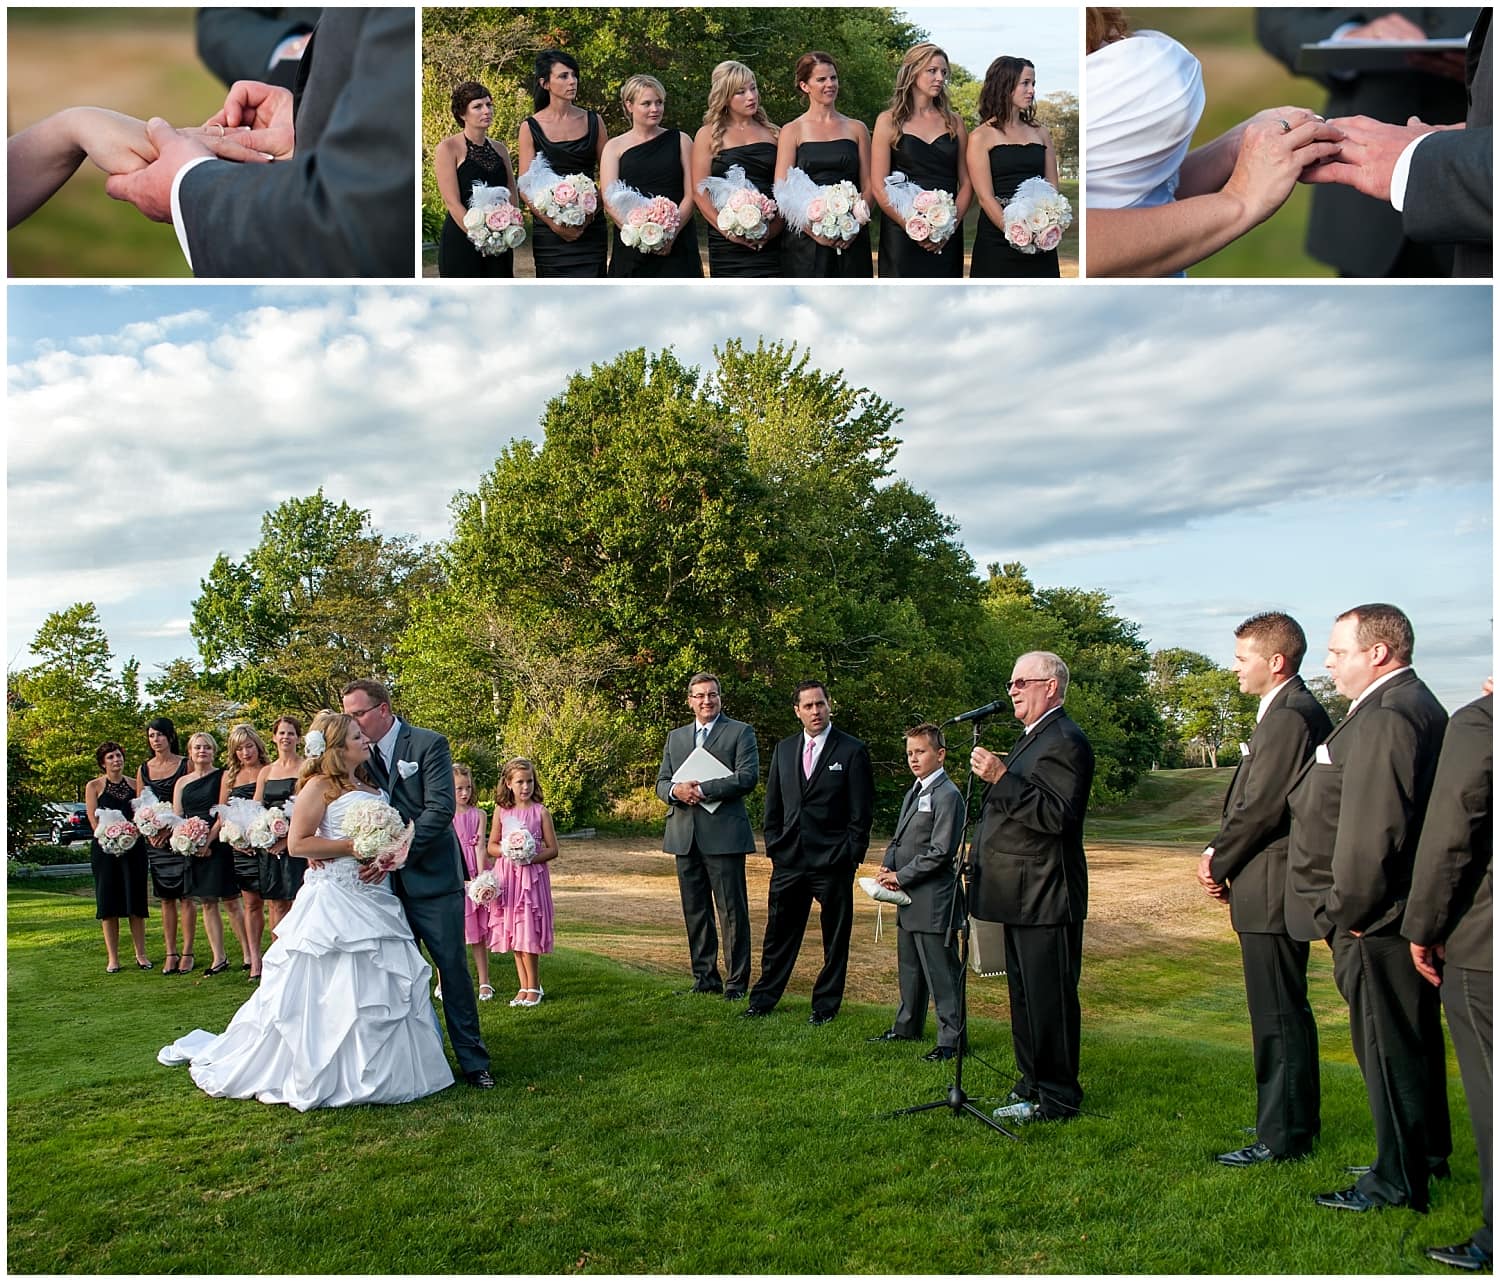 The bride and groom during their wedding ceremony at the Ashburn Golf Club in Halifax Nova Scotia.